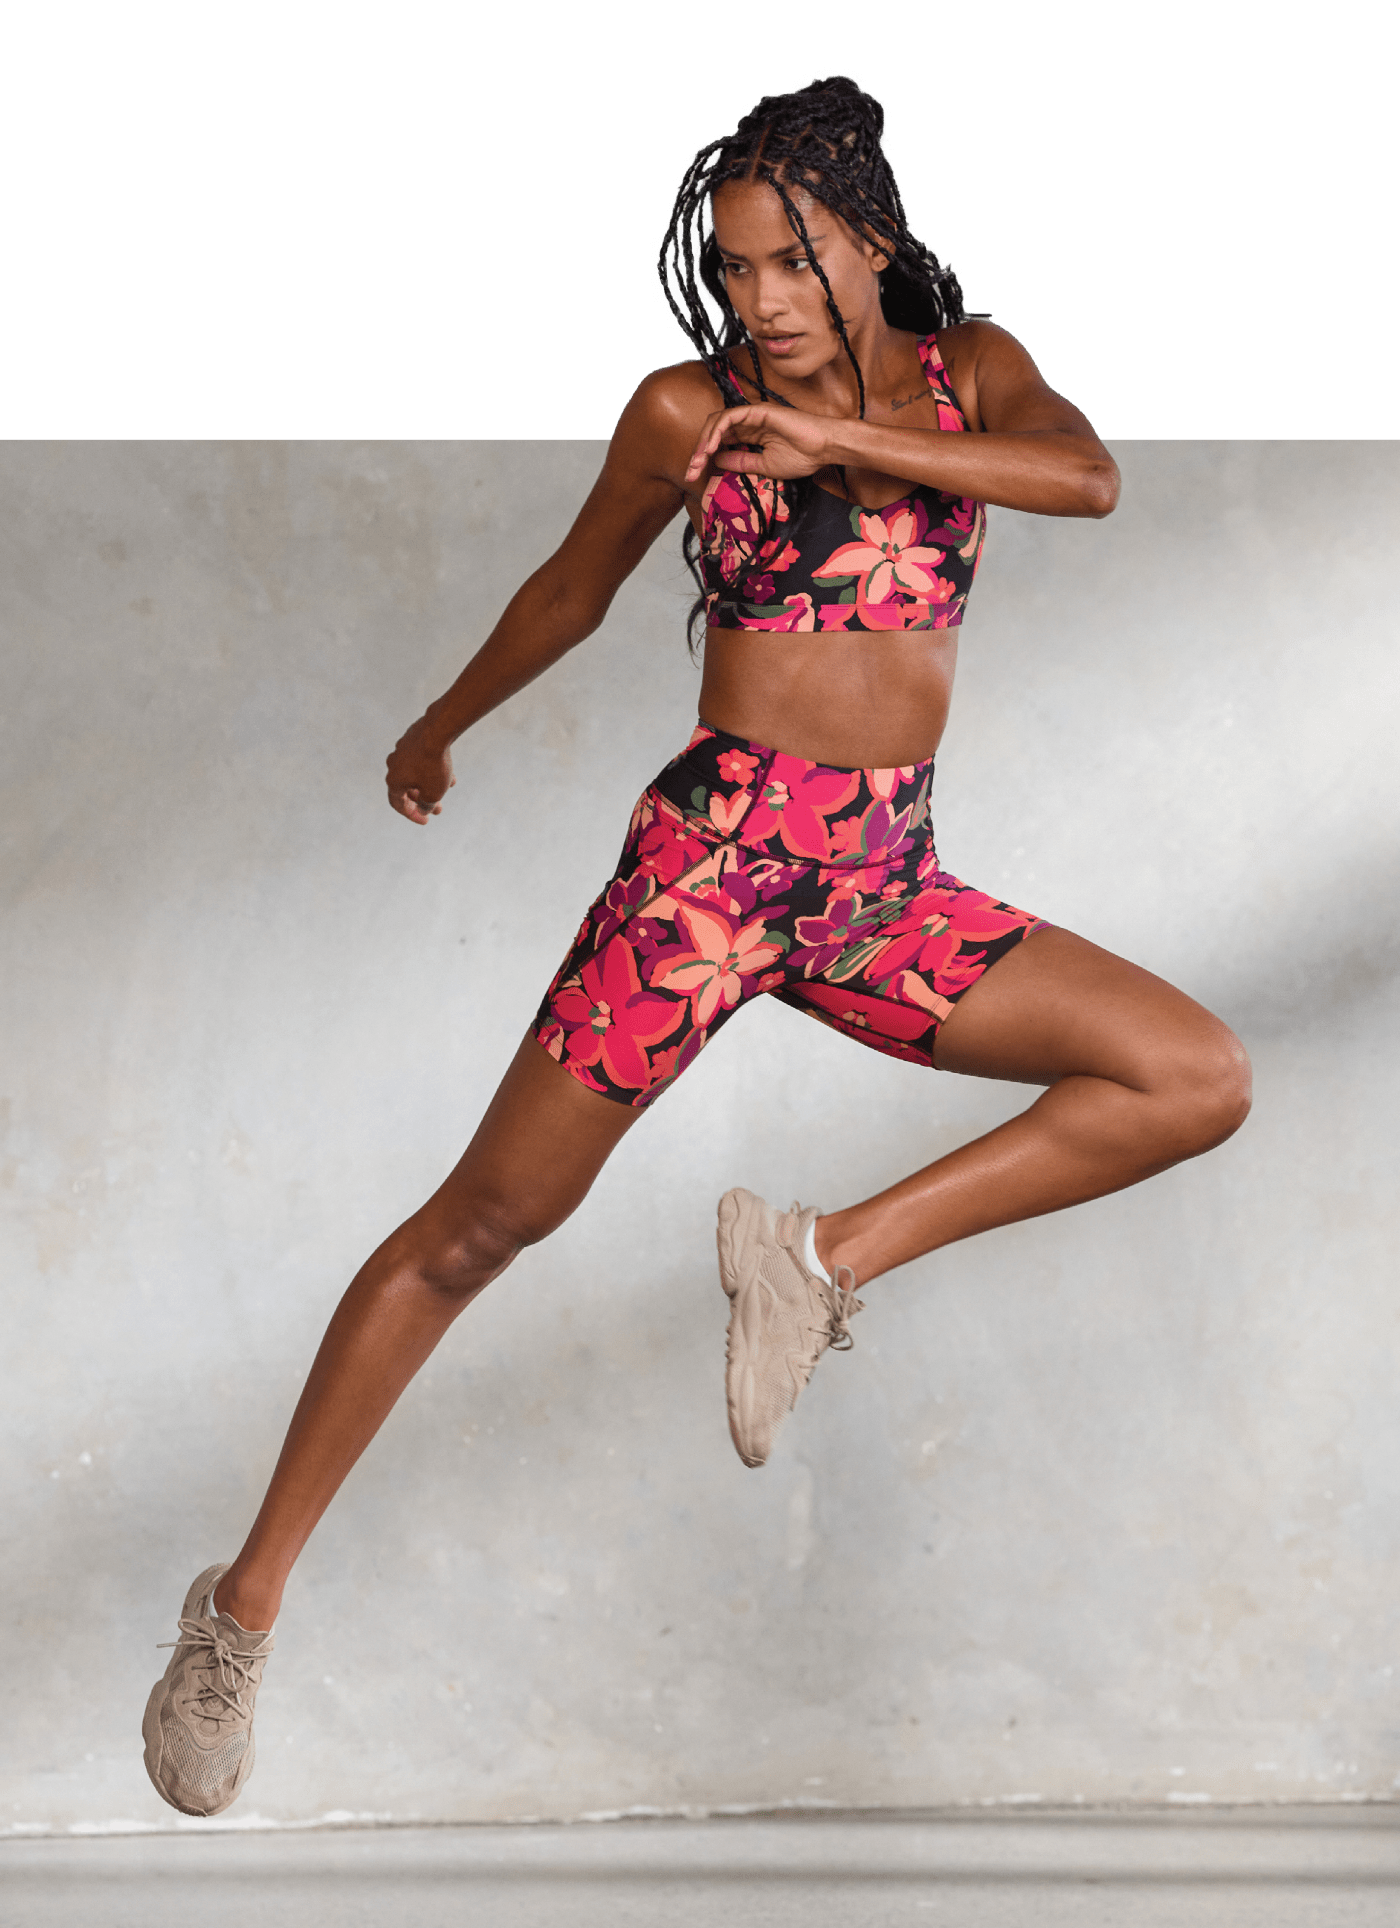 Front image of a model jumping in the air wearing pink floral sports bra and pink floral bike shorts.